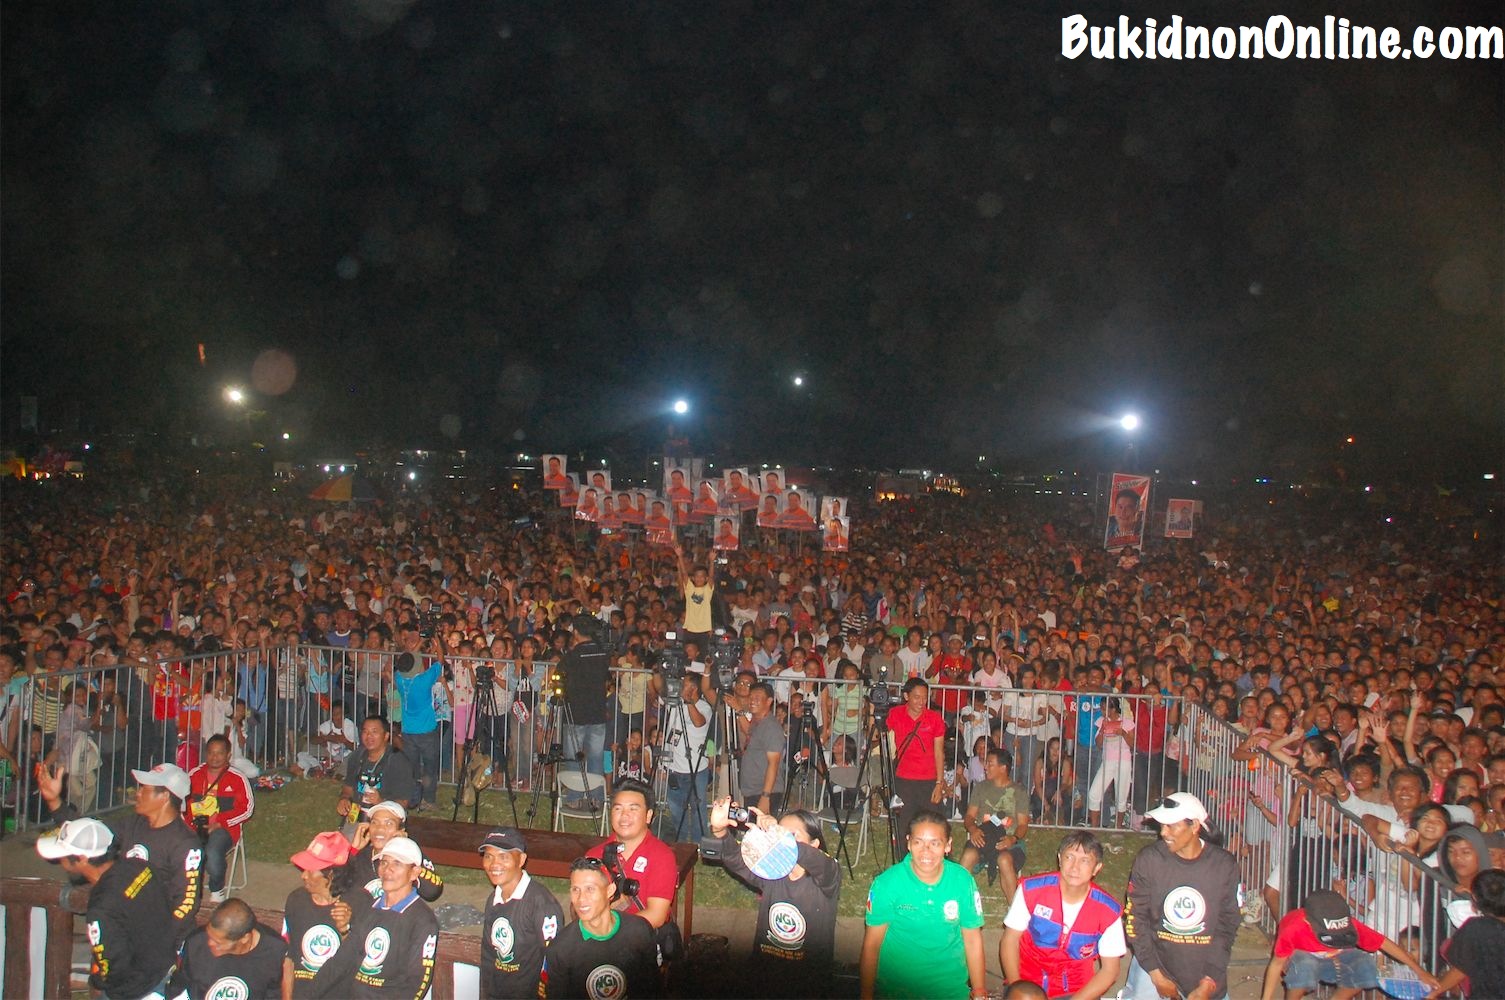 Covering the Team UNA rally in Bukidnon